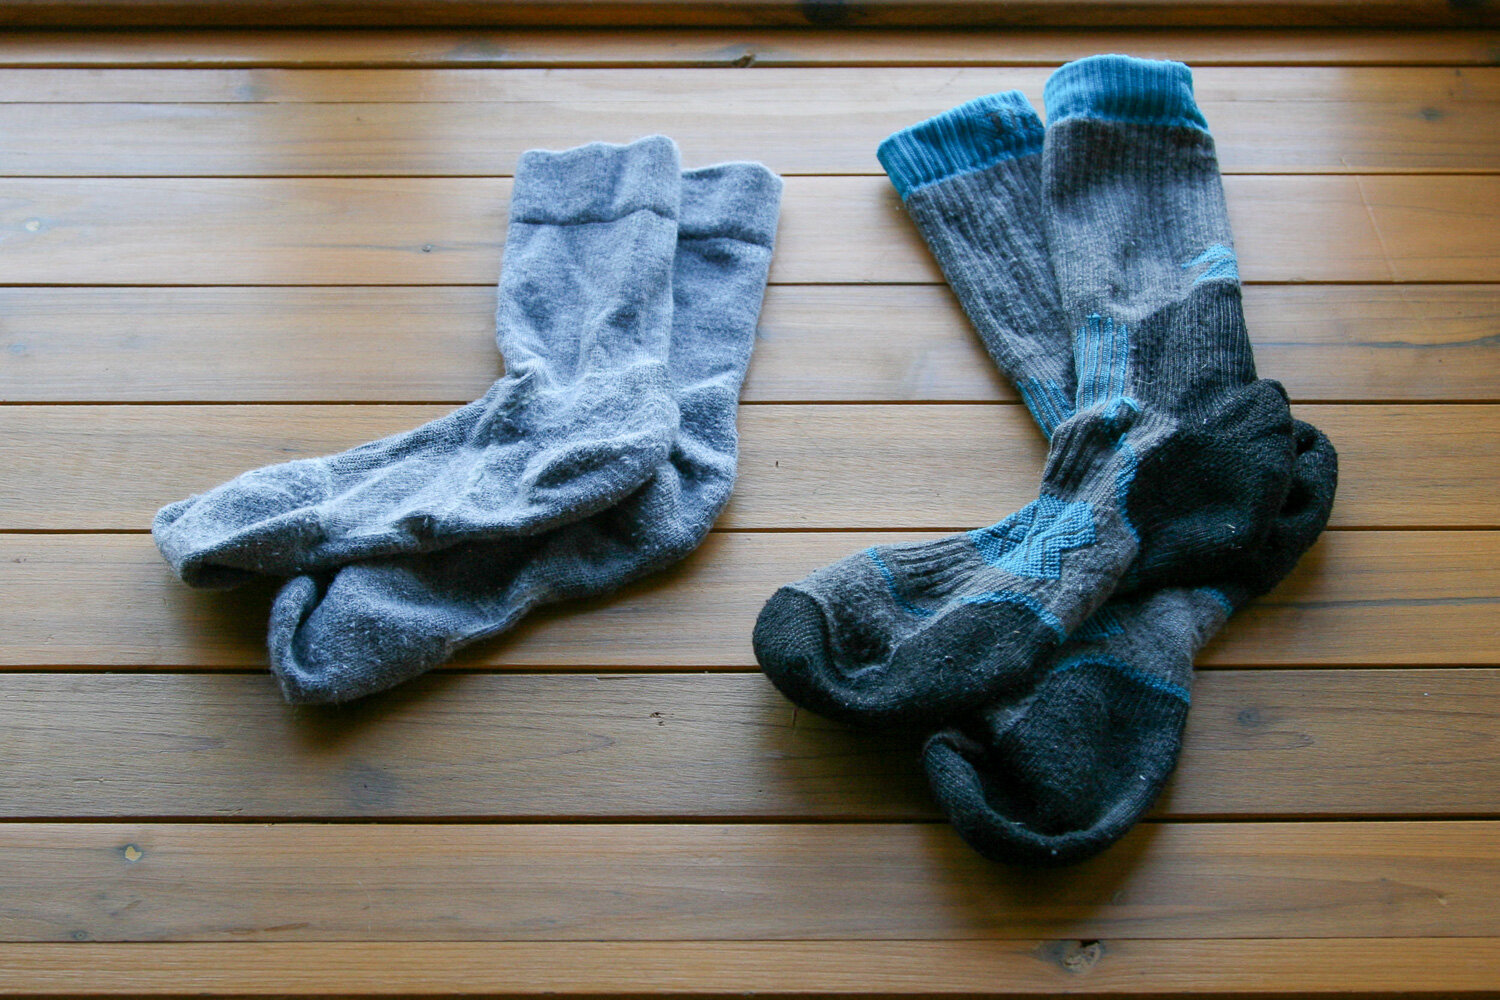 Tall, thick socks, like the THORLOS OUTDOOR FANATIC AND DARN TOUGH BOOT CUSHION HIKING SOCKS, PAIR WELL WITH Rain BOOTS